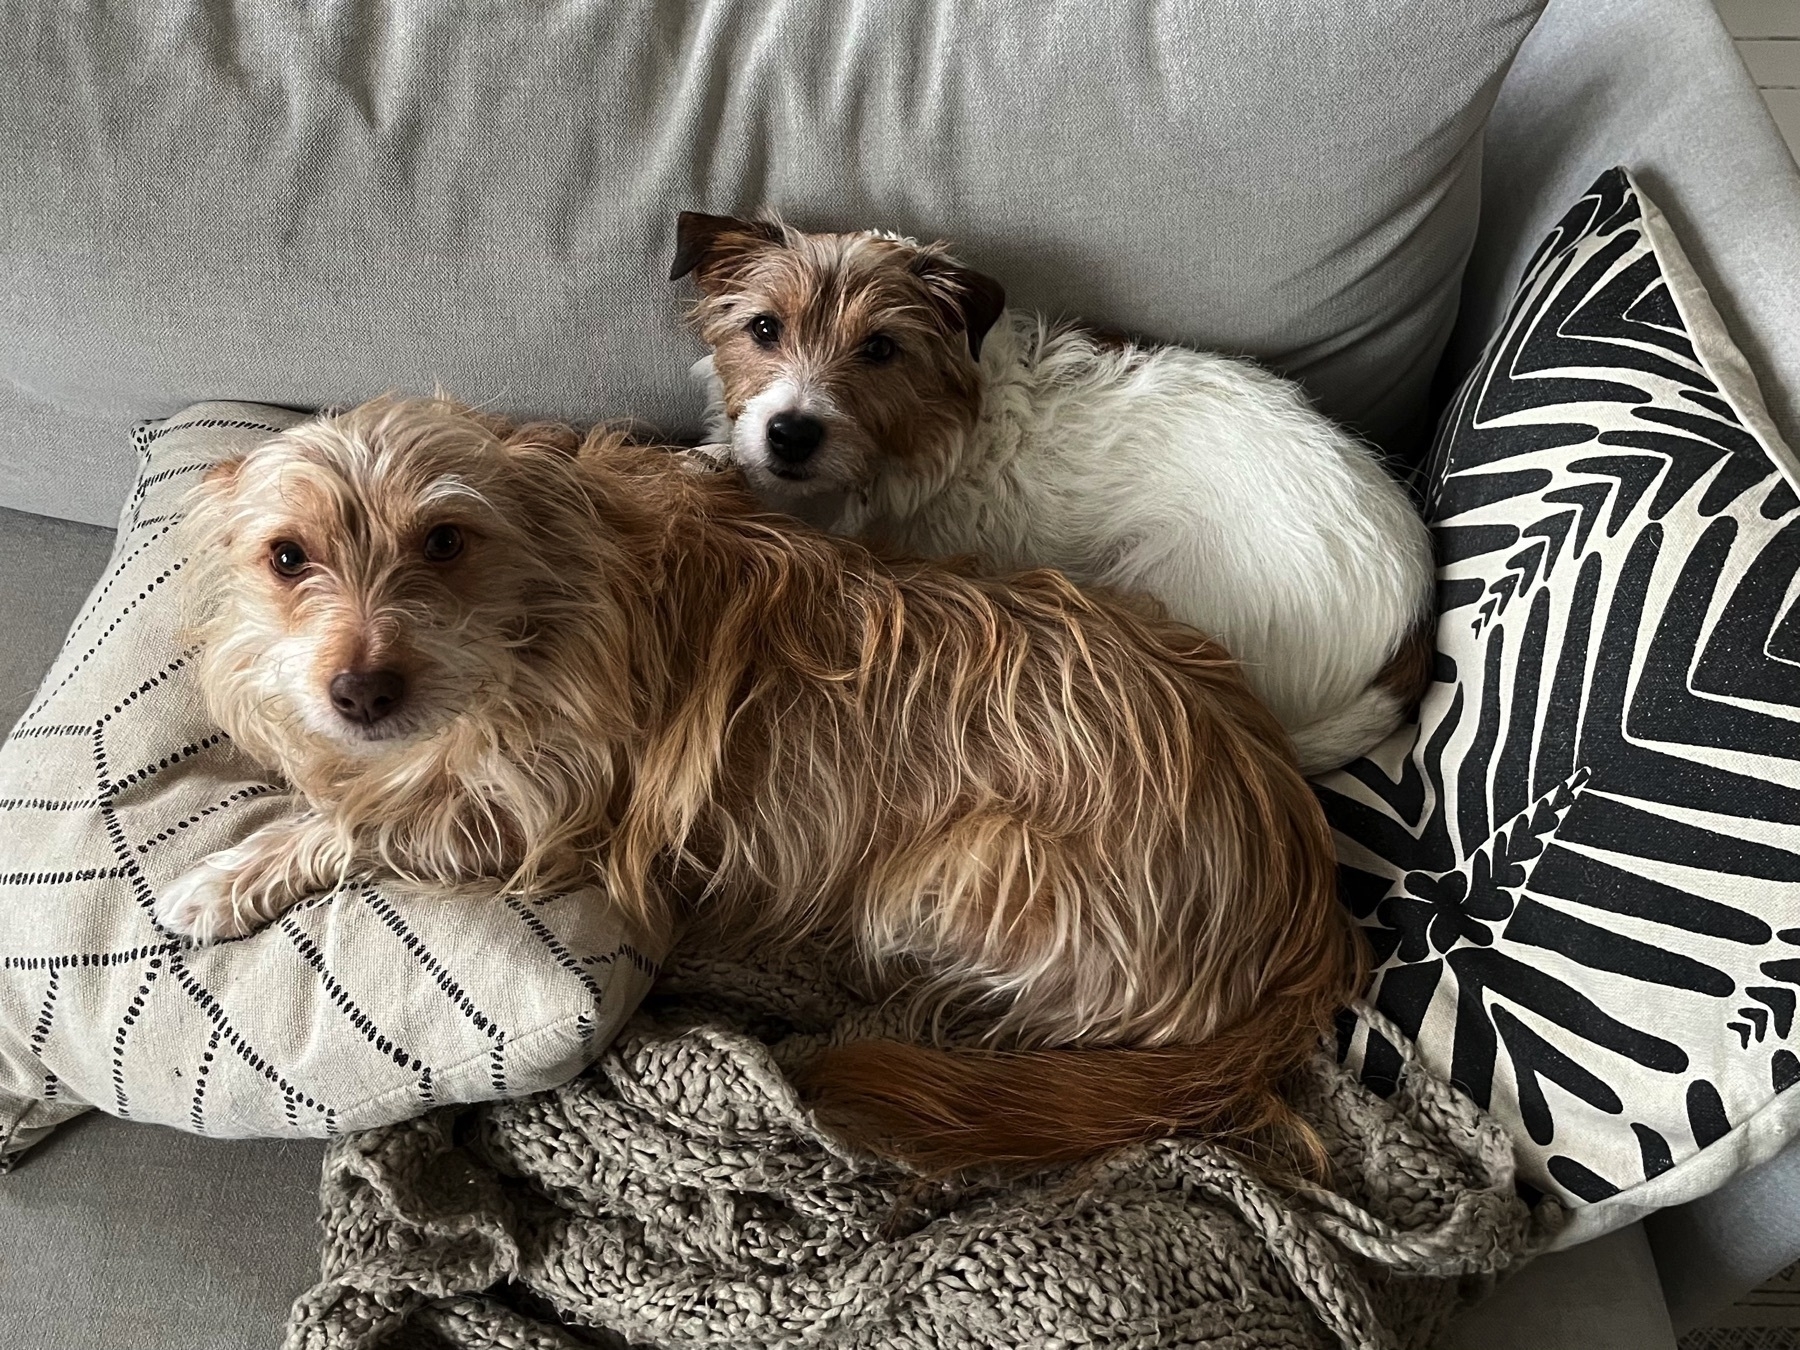 Two dogs resting on a cozy couch surrounded by patterned cushions.